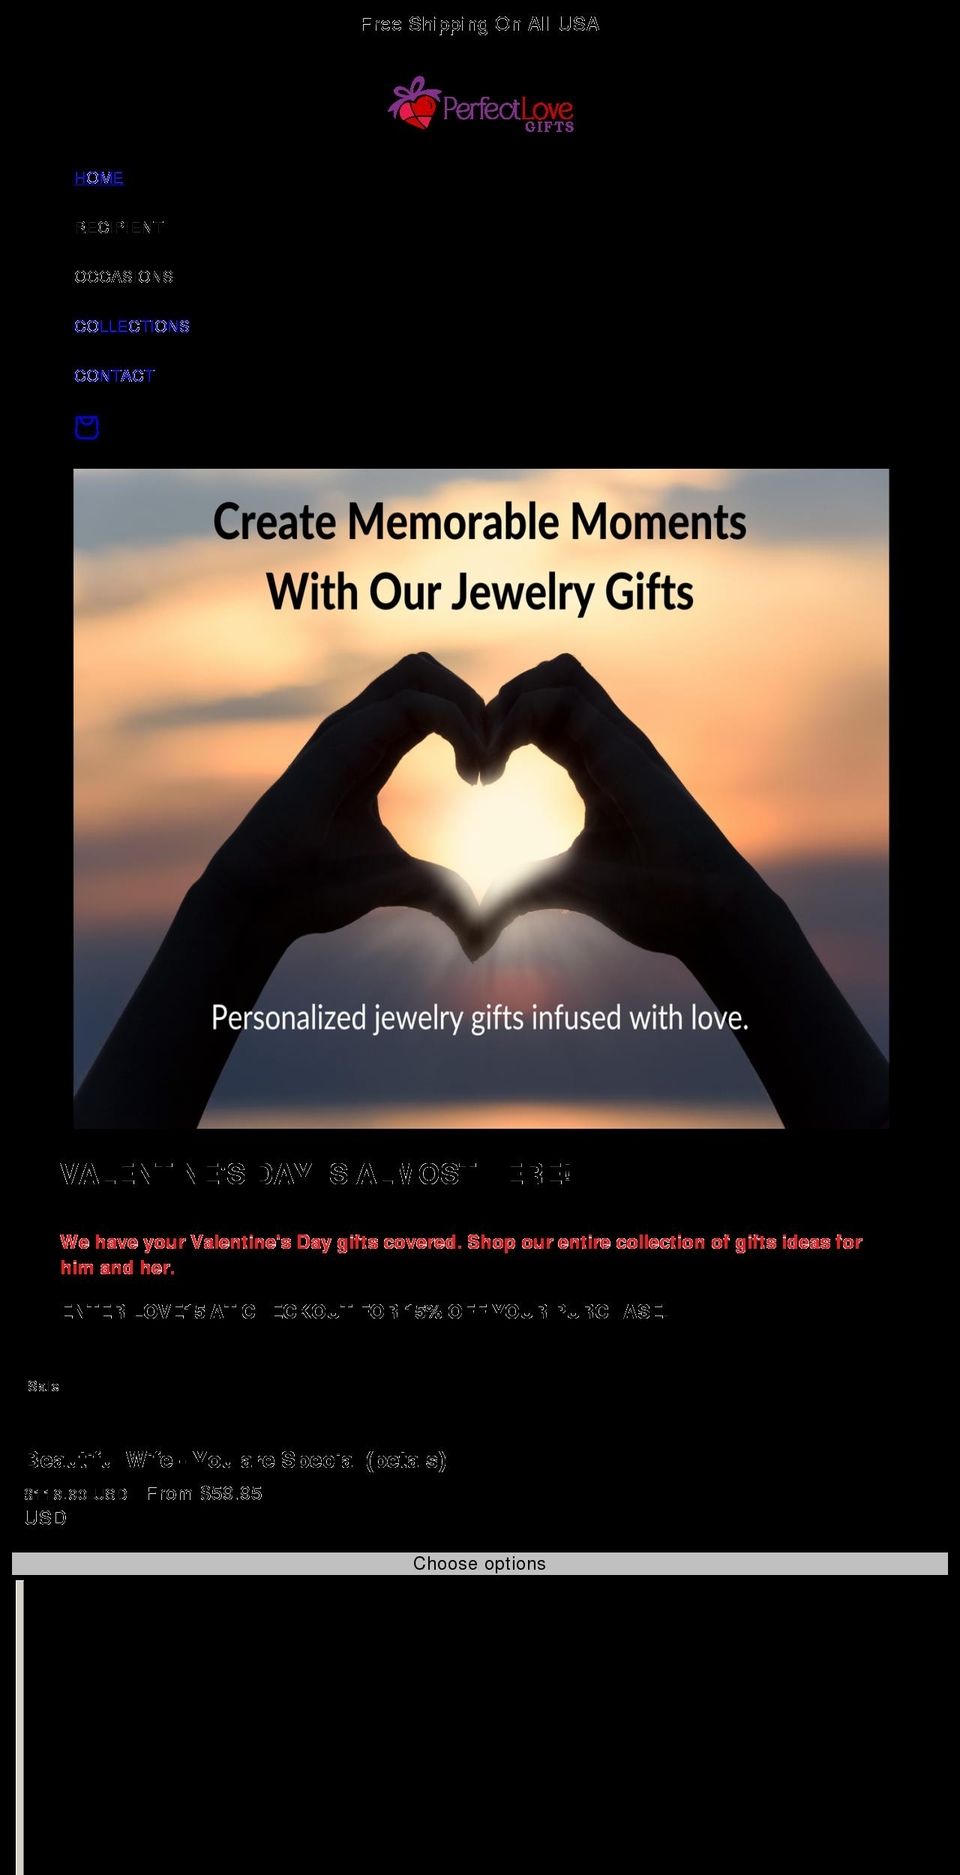 Gifts Shopify theme site example perfectlovegifts.com